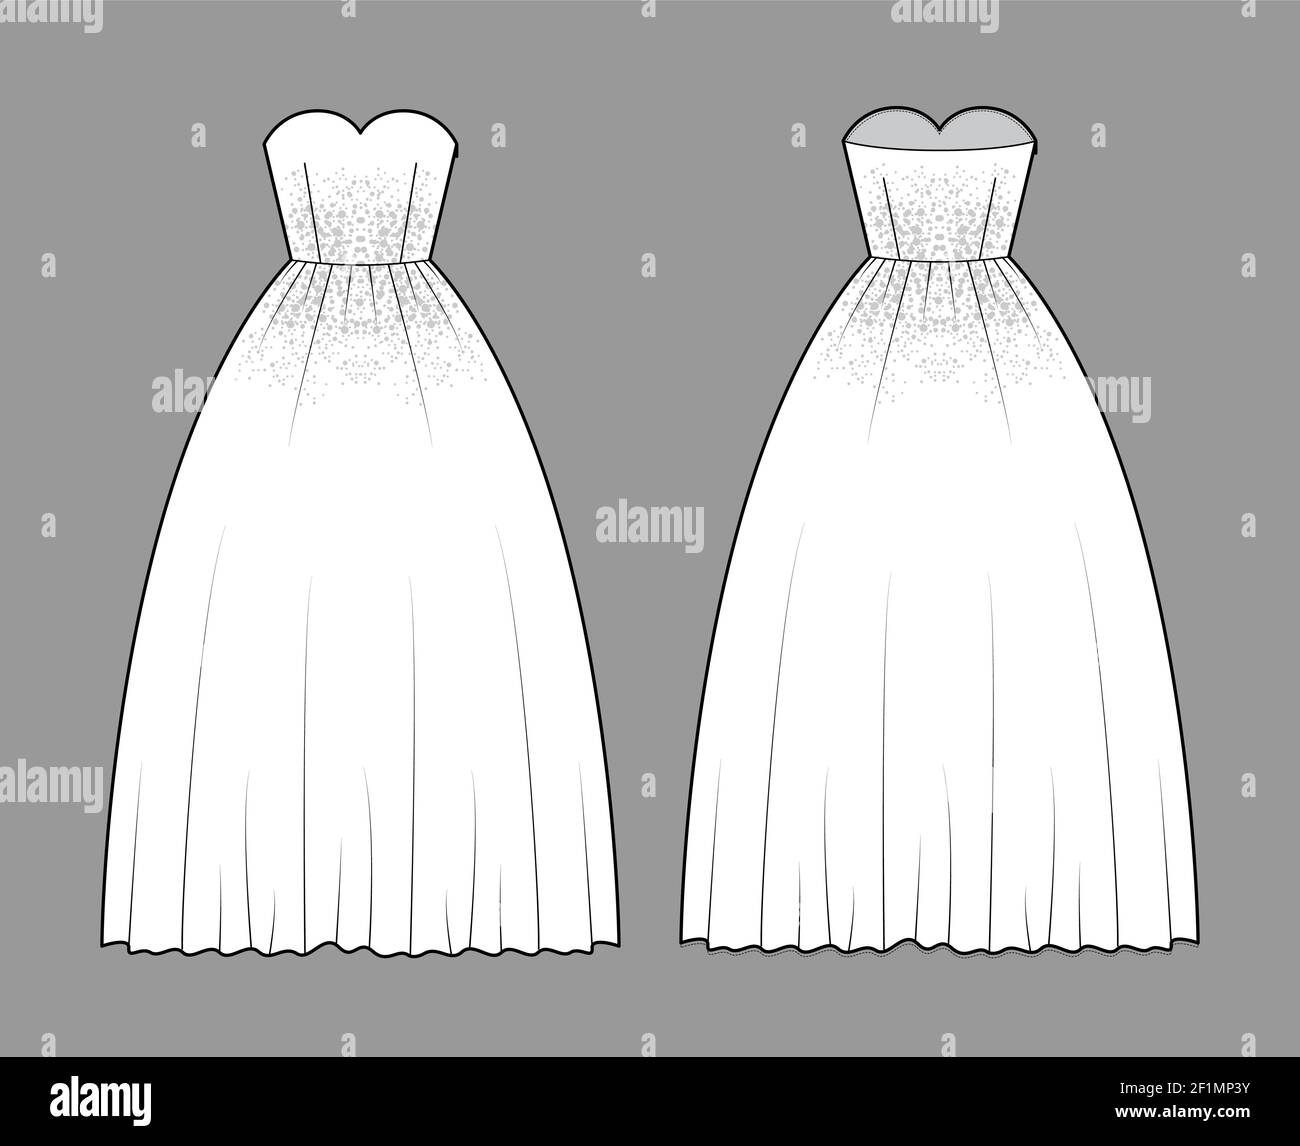 Full length gown Stock Vector Images - Alamy